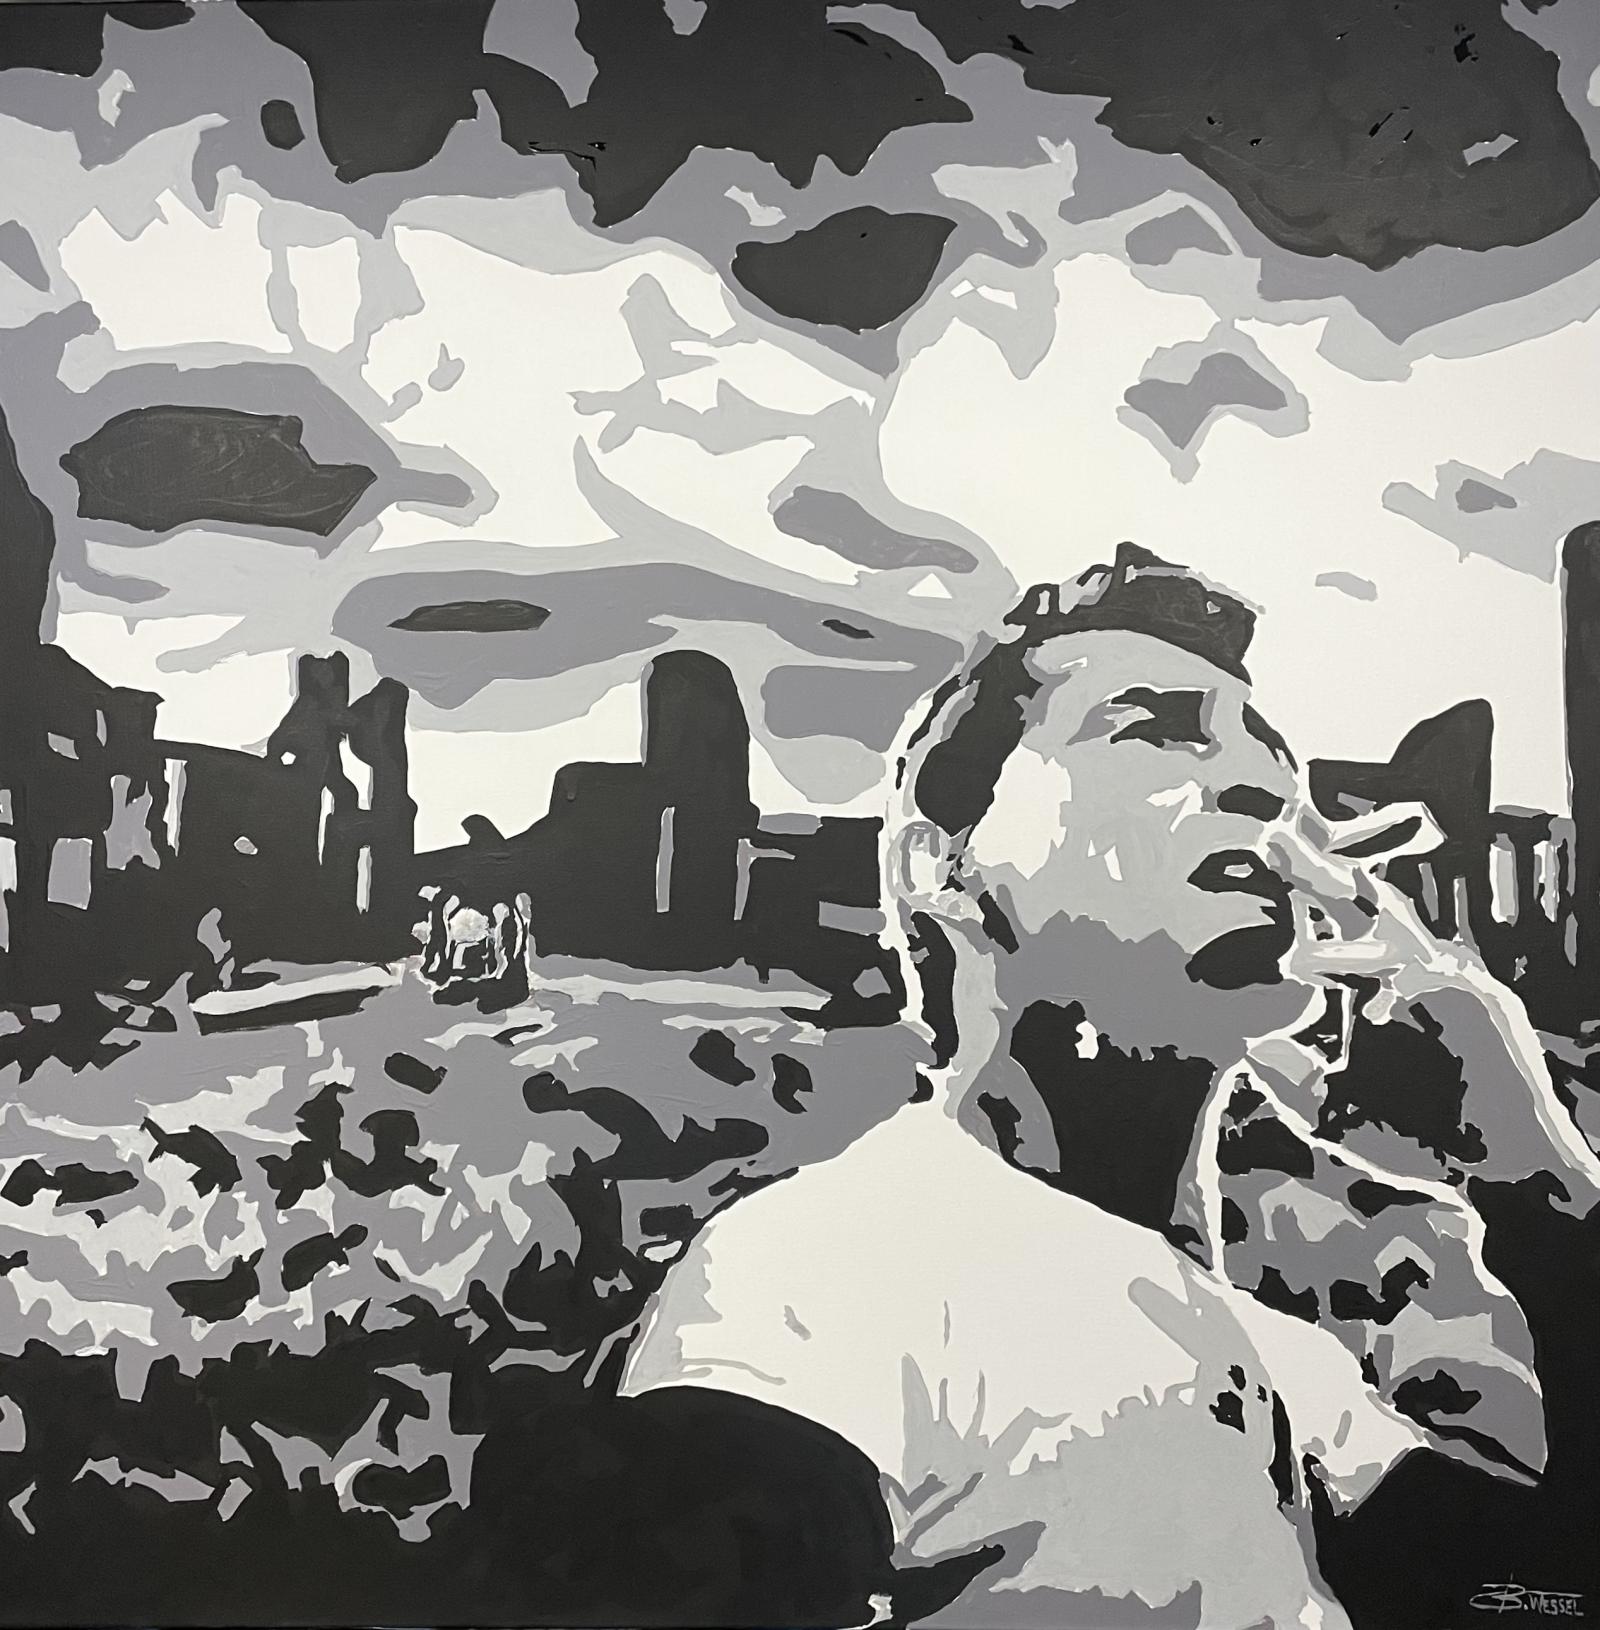 Figurative abstract of Rod Serling proudly standing in the foreground of devastation. This is a tribute piece to Mr. Serling and his incredible contribution to society in shedding a light on life’s absurdities. 